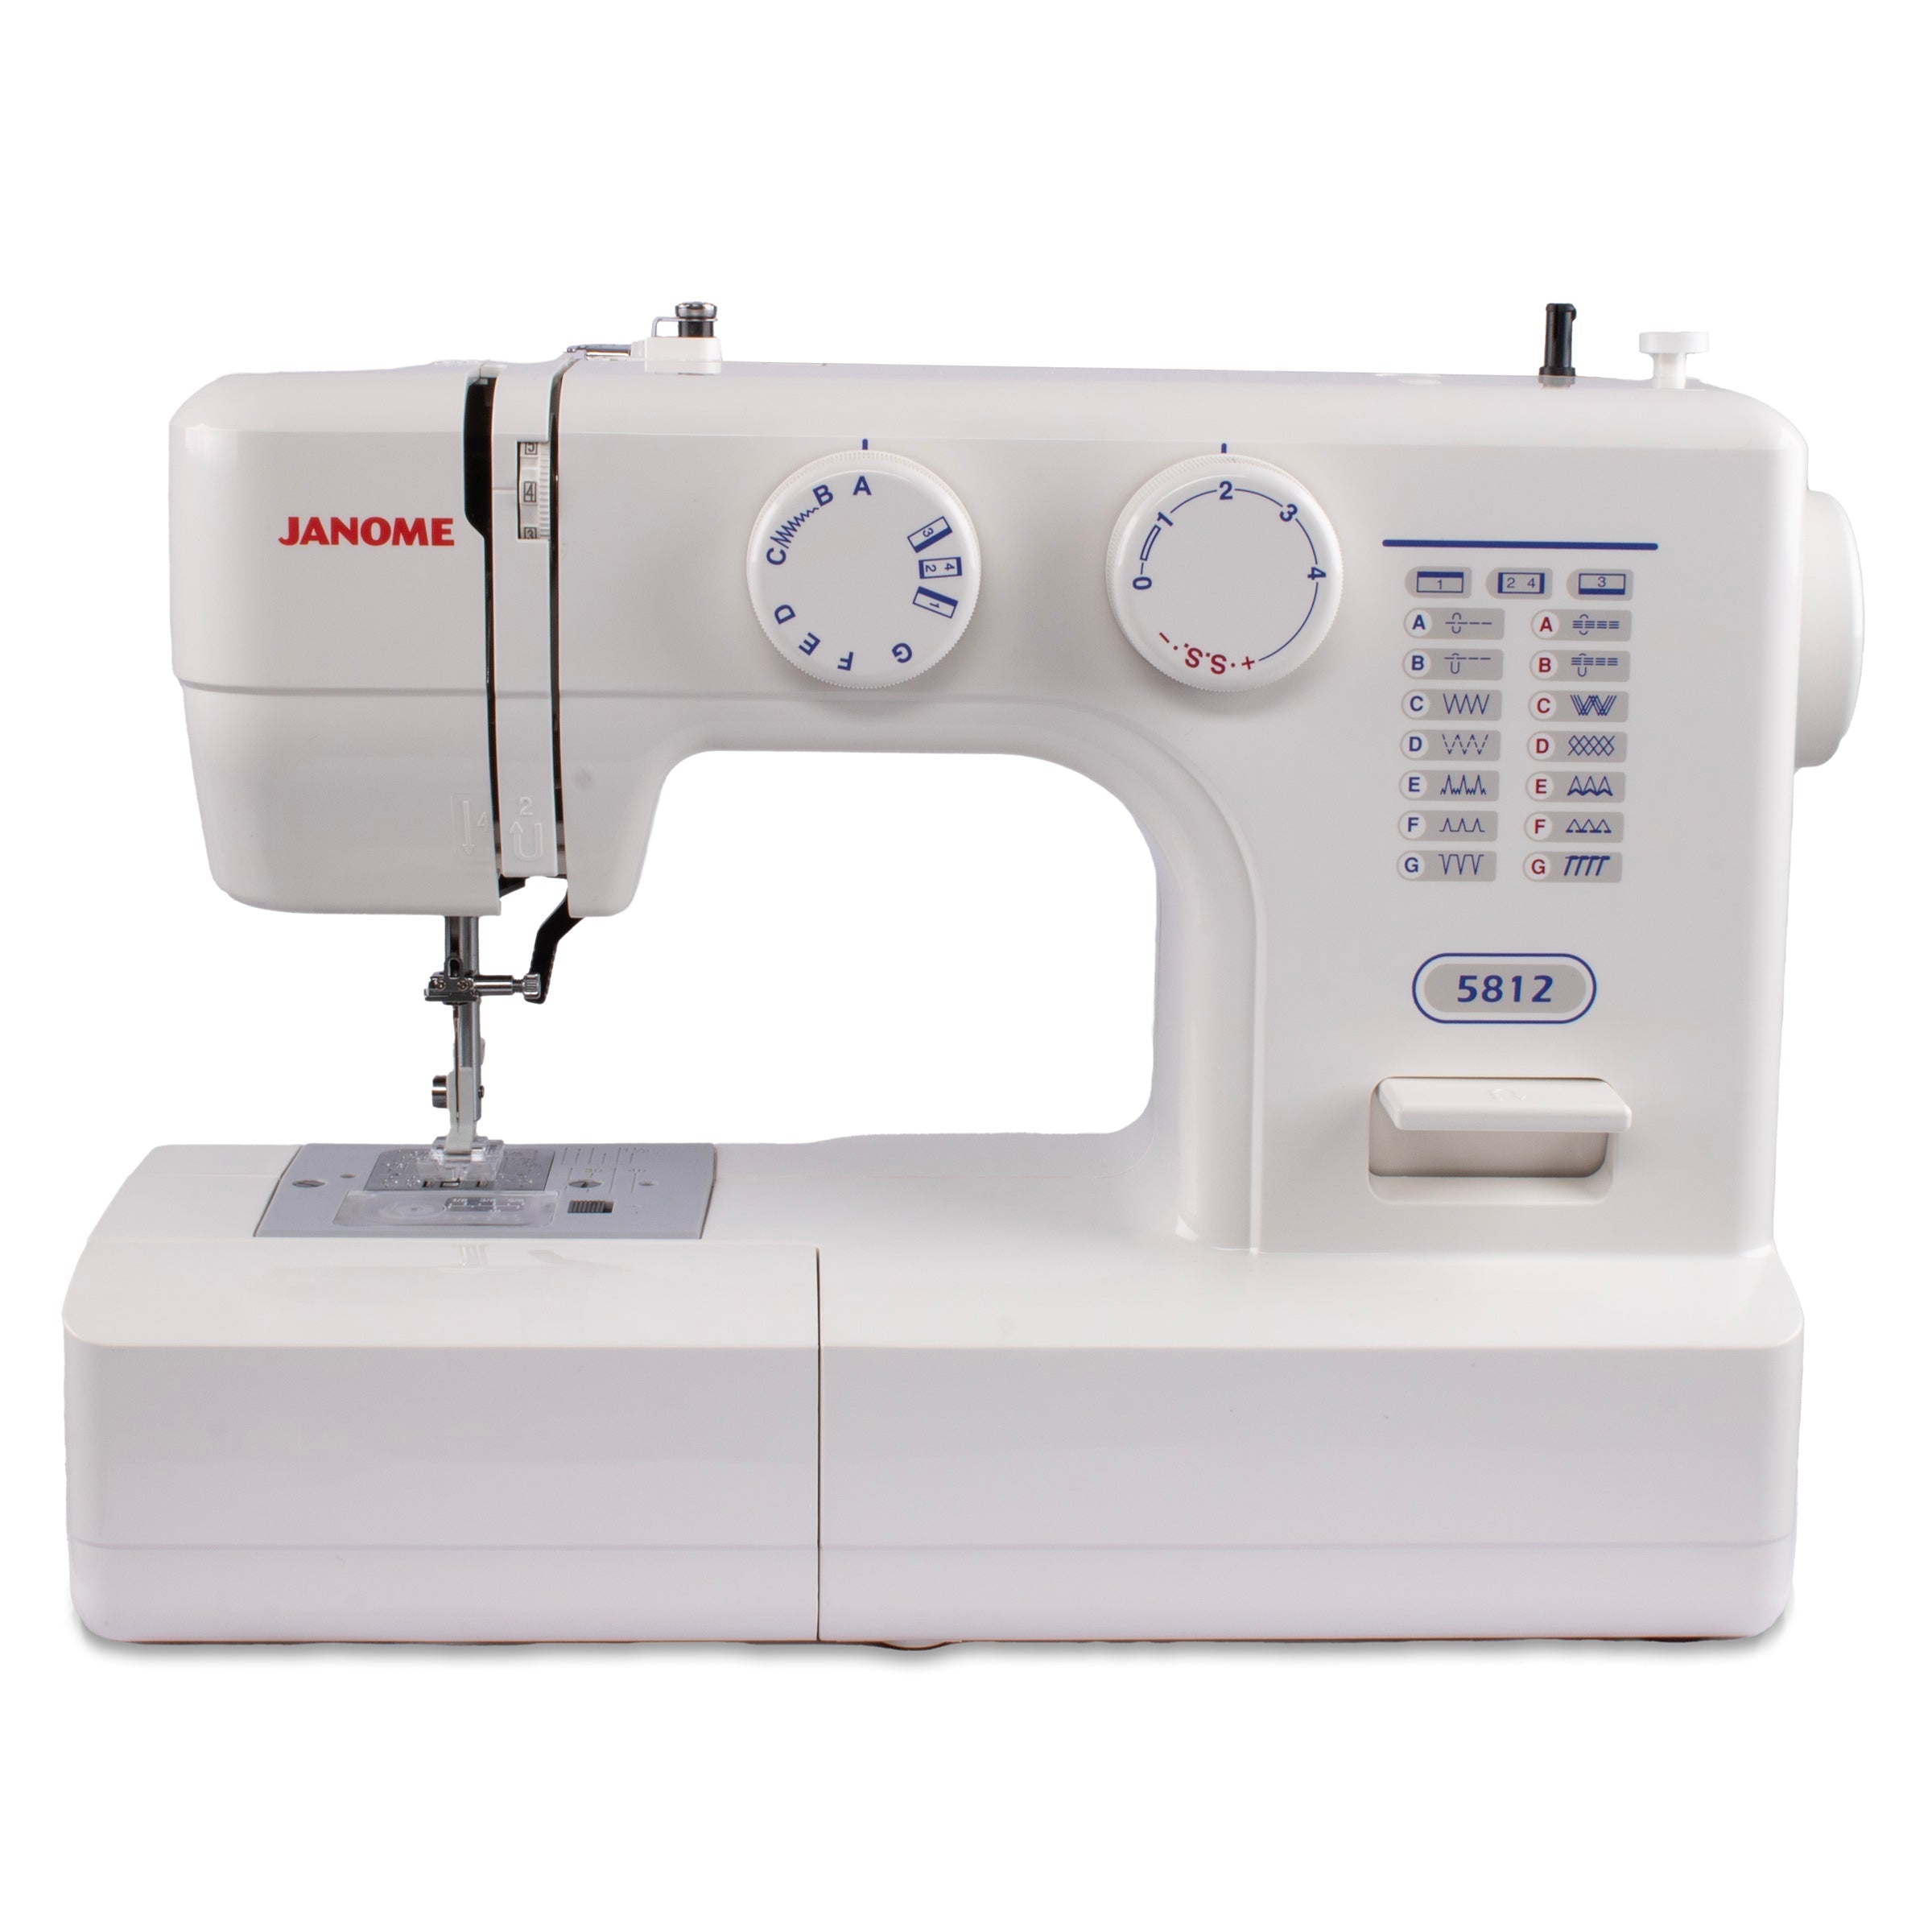 front facing image of the Janome 5812 Sewing Machine